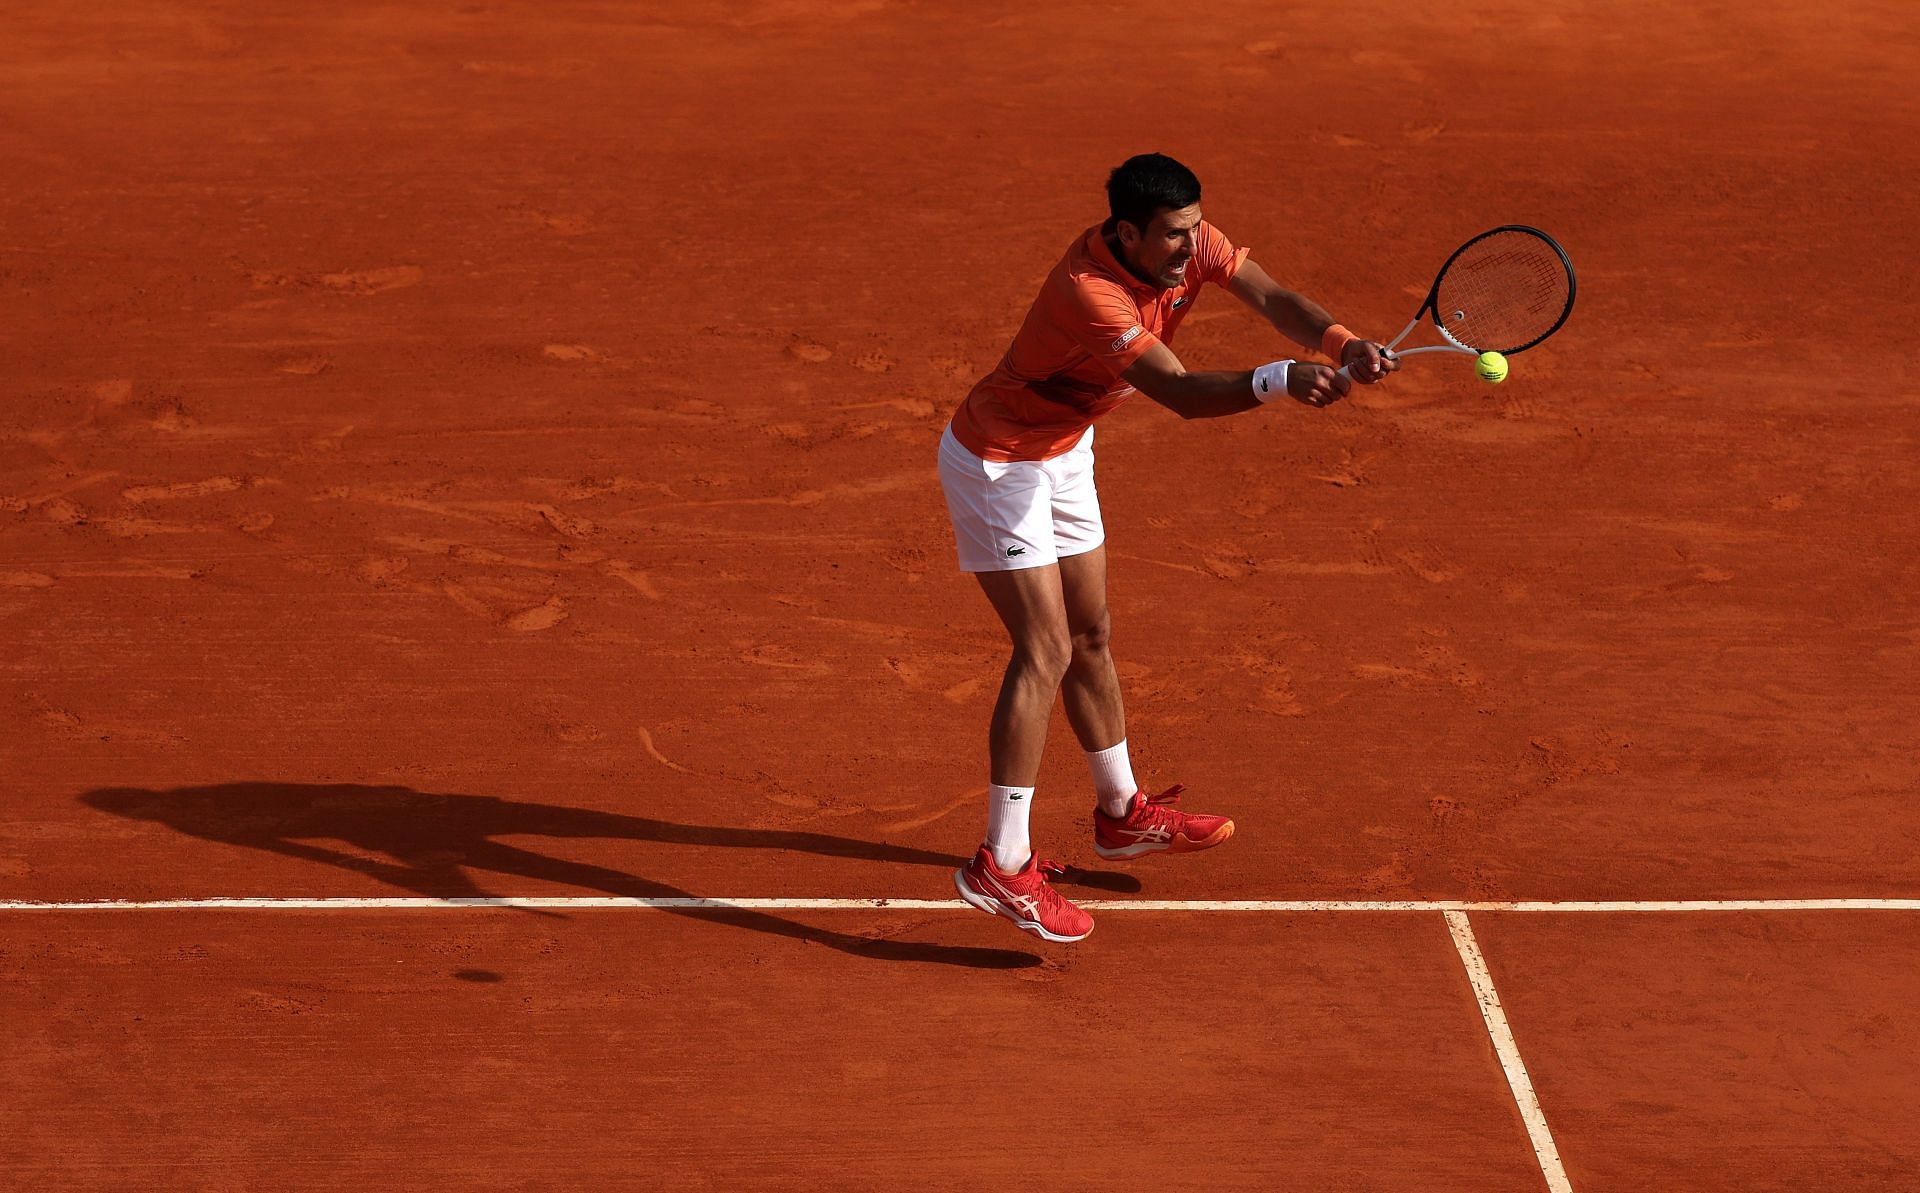 Novak Djokovic will compete in the final of the Serbia Open on Sunday